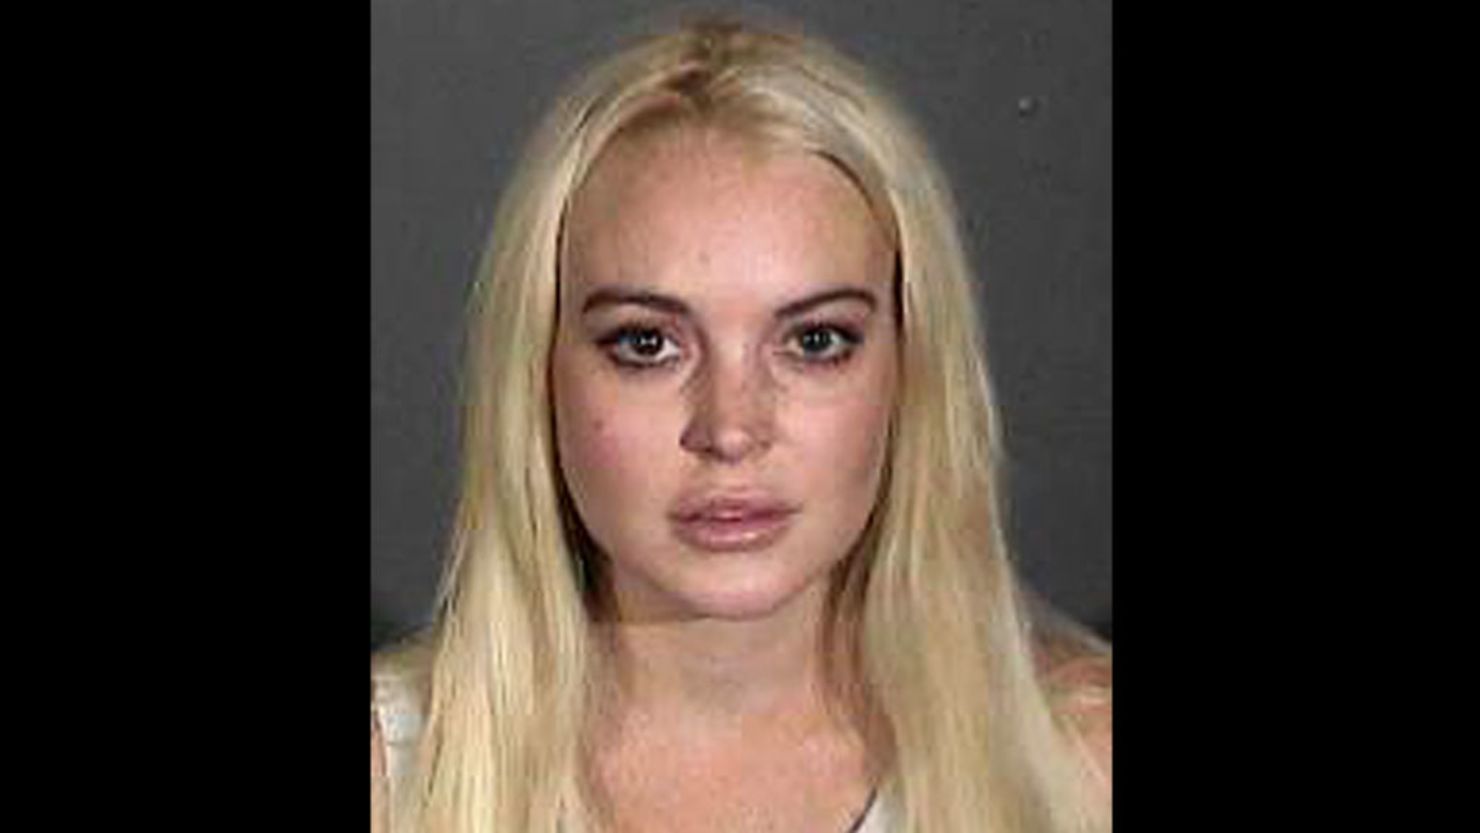 Lindsay Lohan must work two shifts a week at the Los Angeles County morgue until a probation revocation hearing in November.